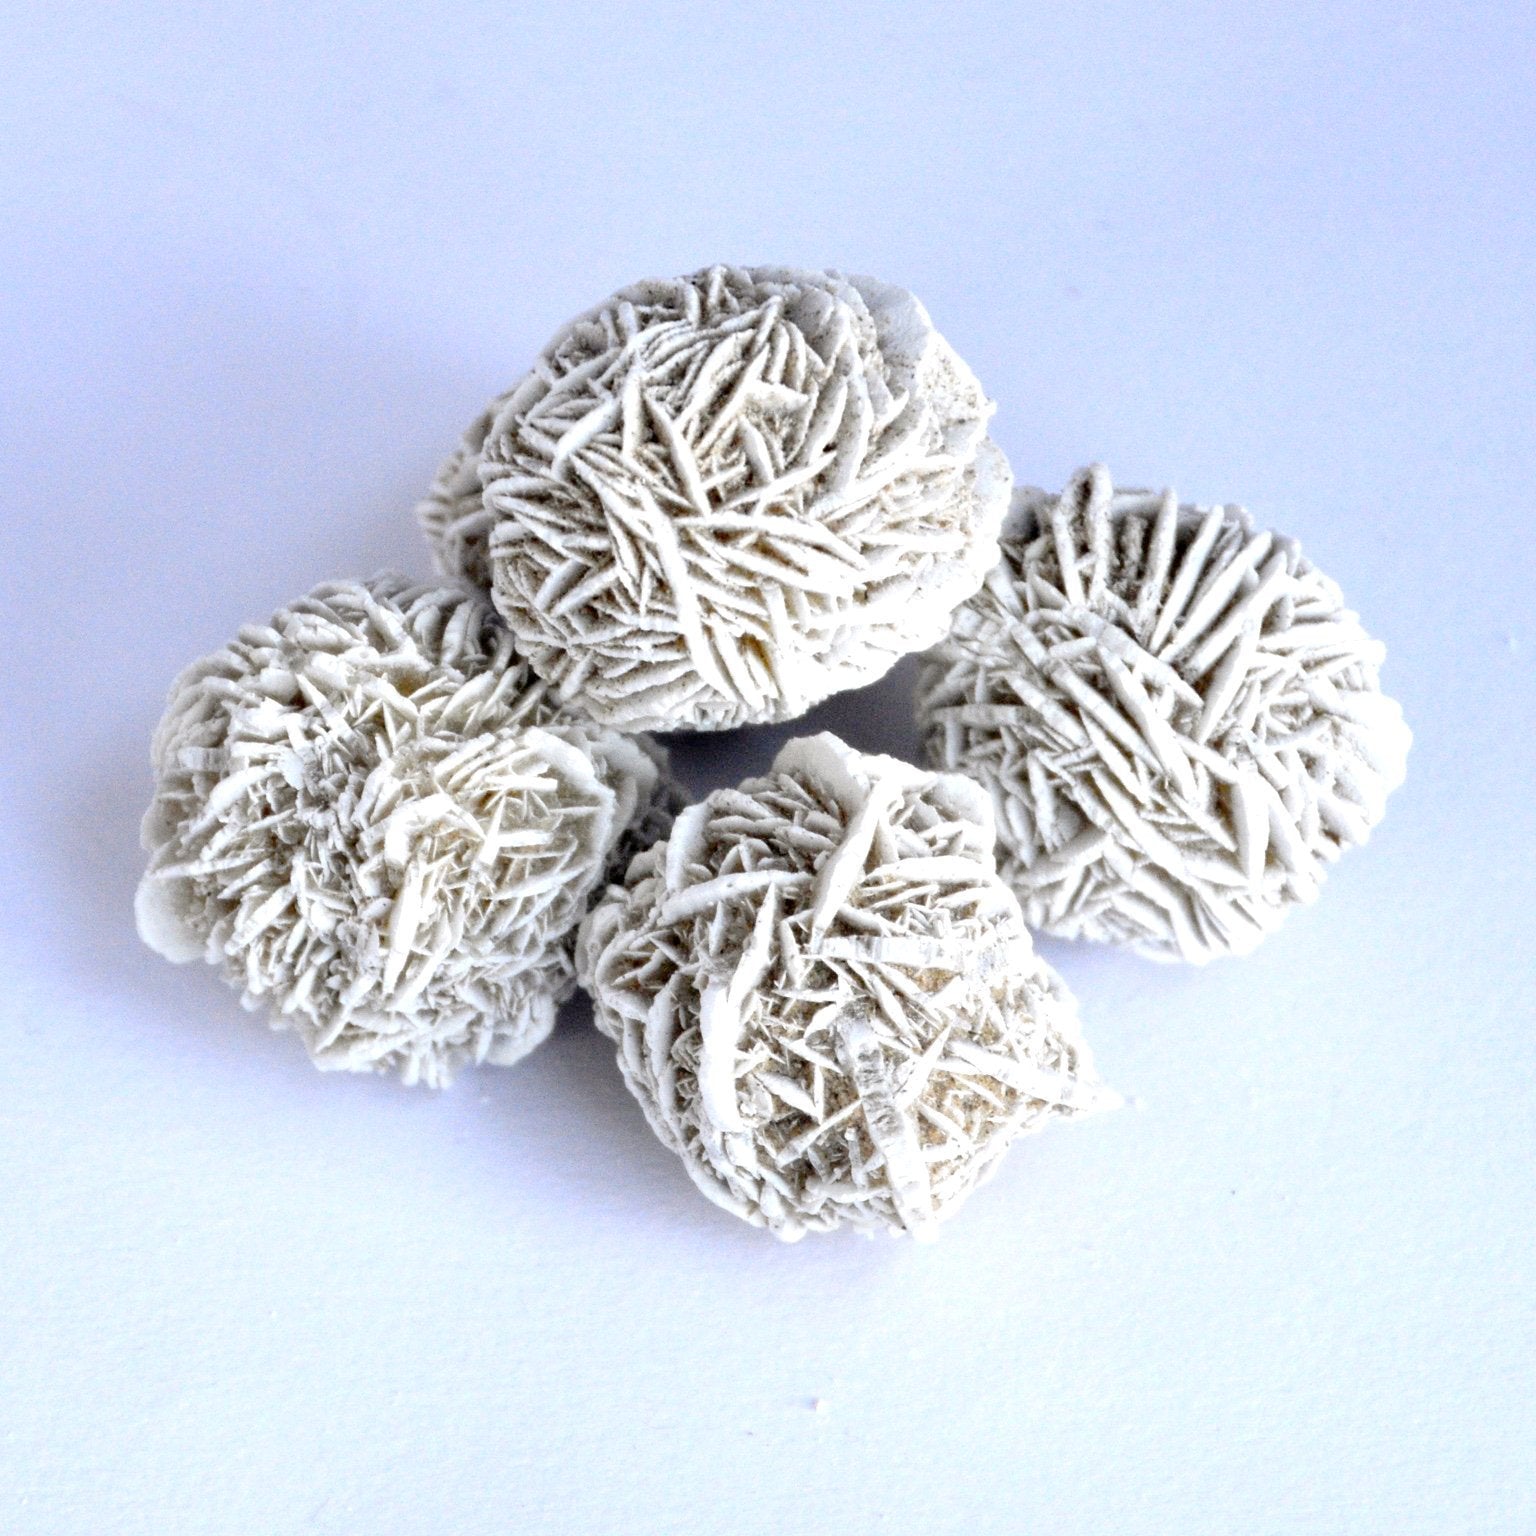 Desert Rose Stone - Virtues of the stones - Lithotherapy - Minerals Kingdoms